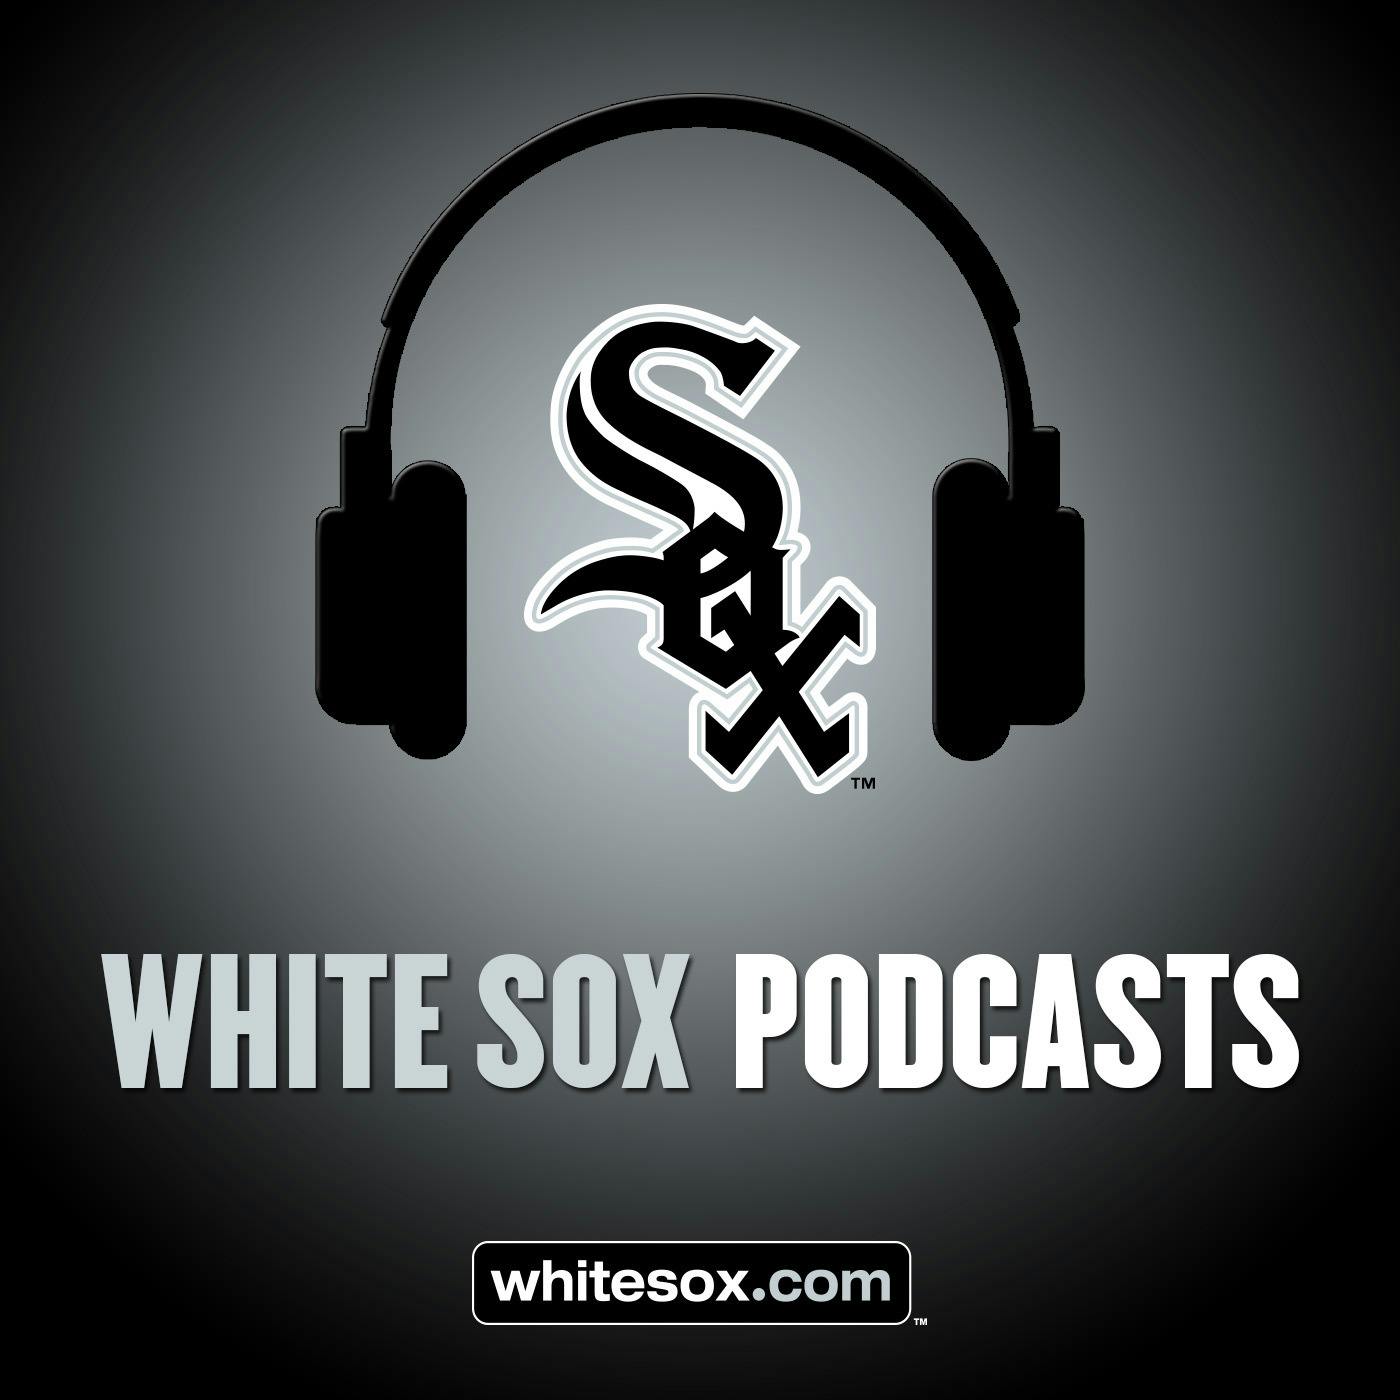 1/25/19: White Sox Weekly